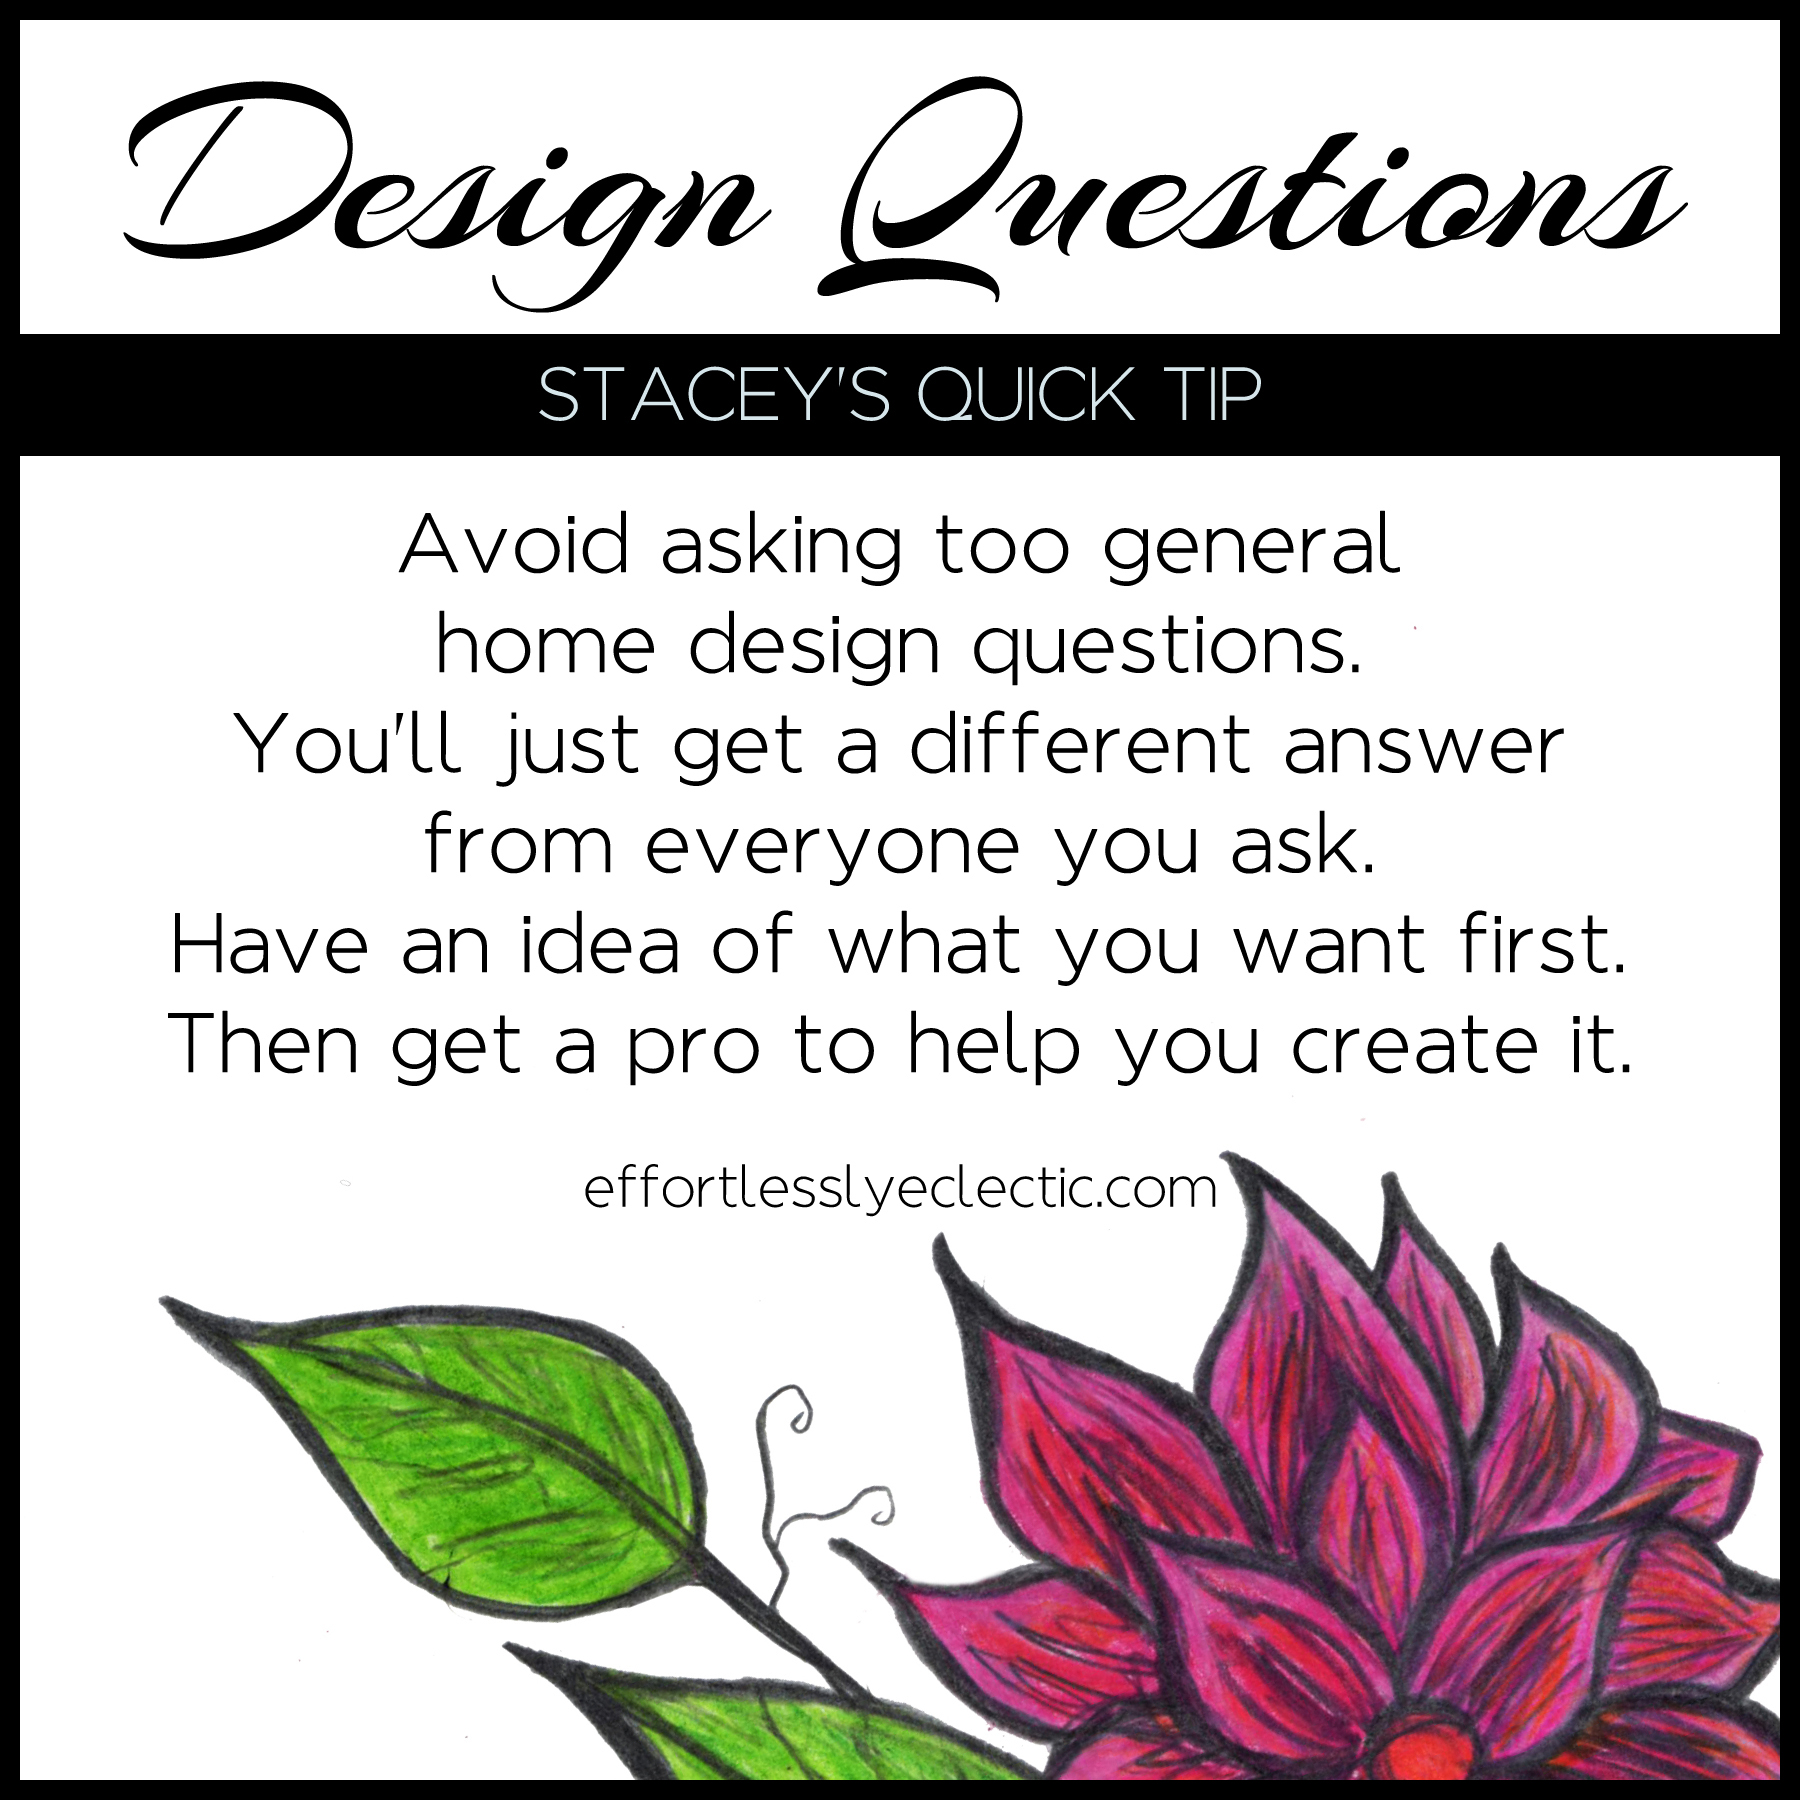 Design Questions - A home decor tip about getting decorating help